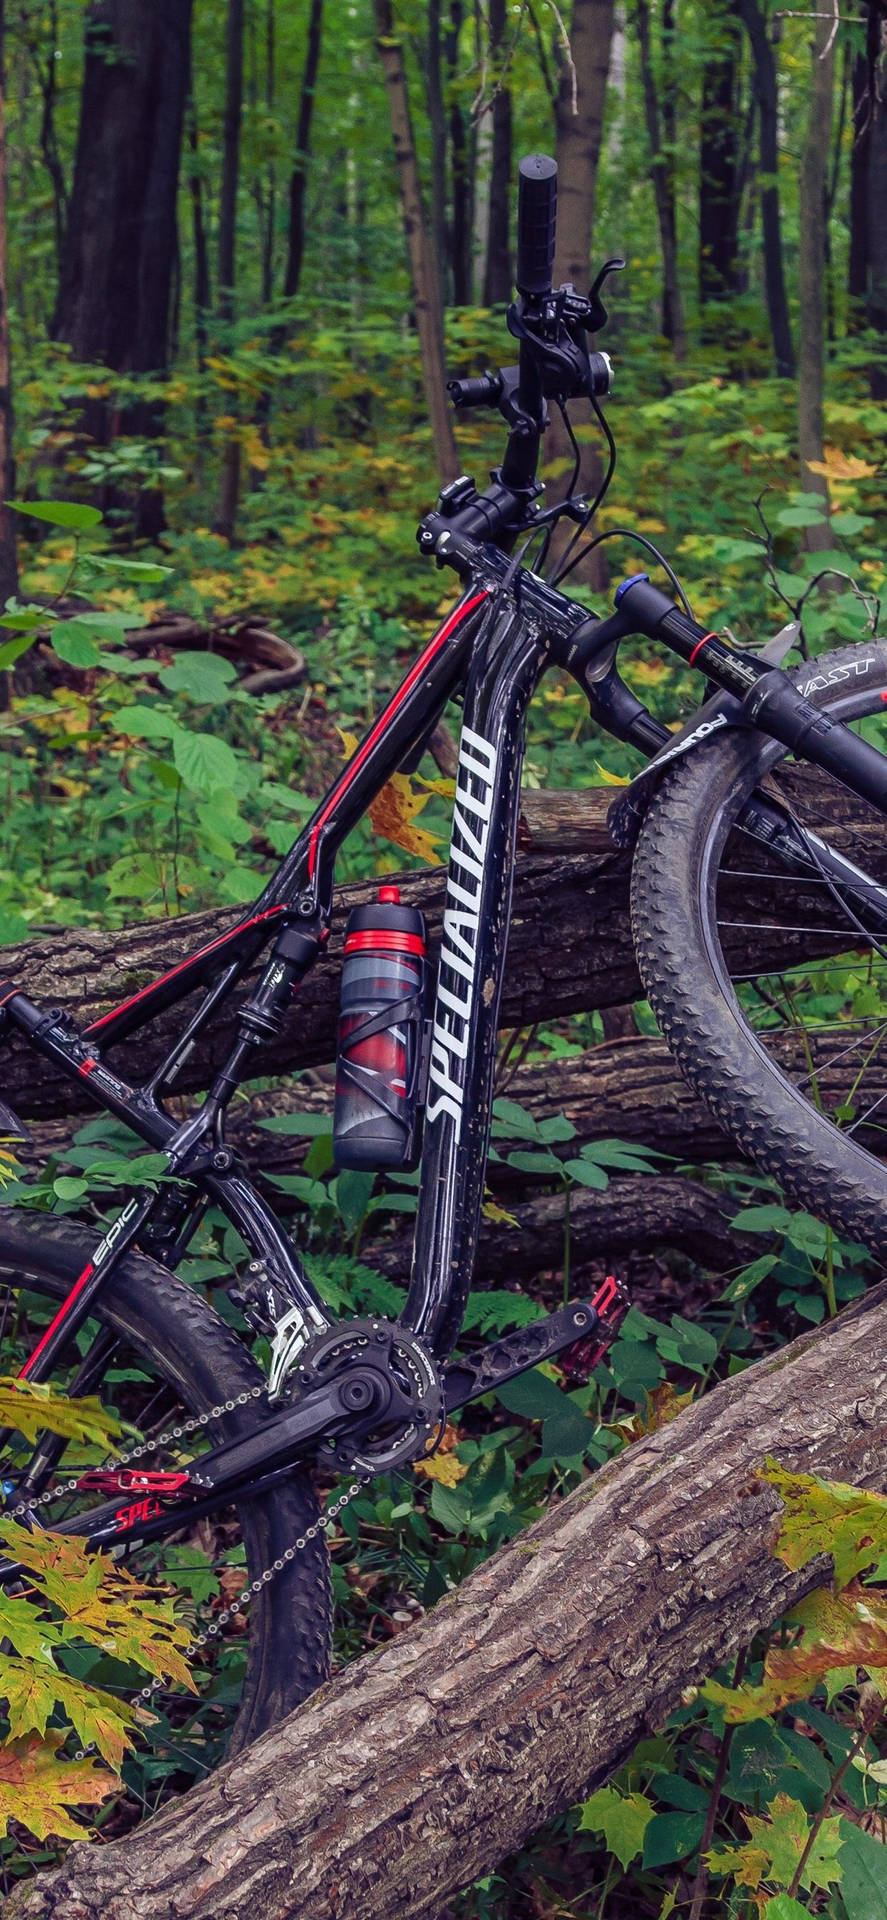 Verdant Forest Mountain Bicycle Iphone Wallpaper